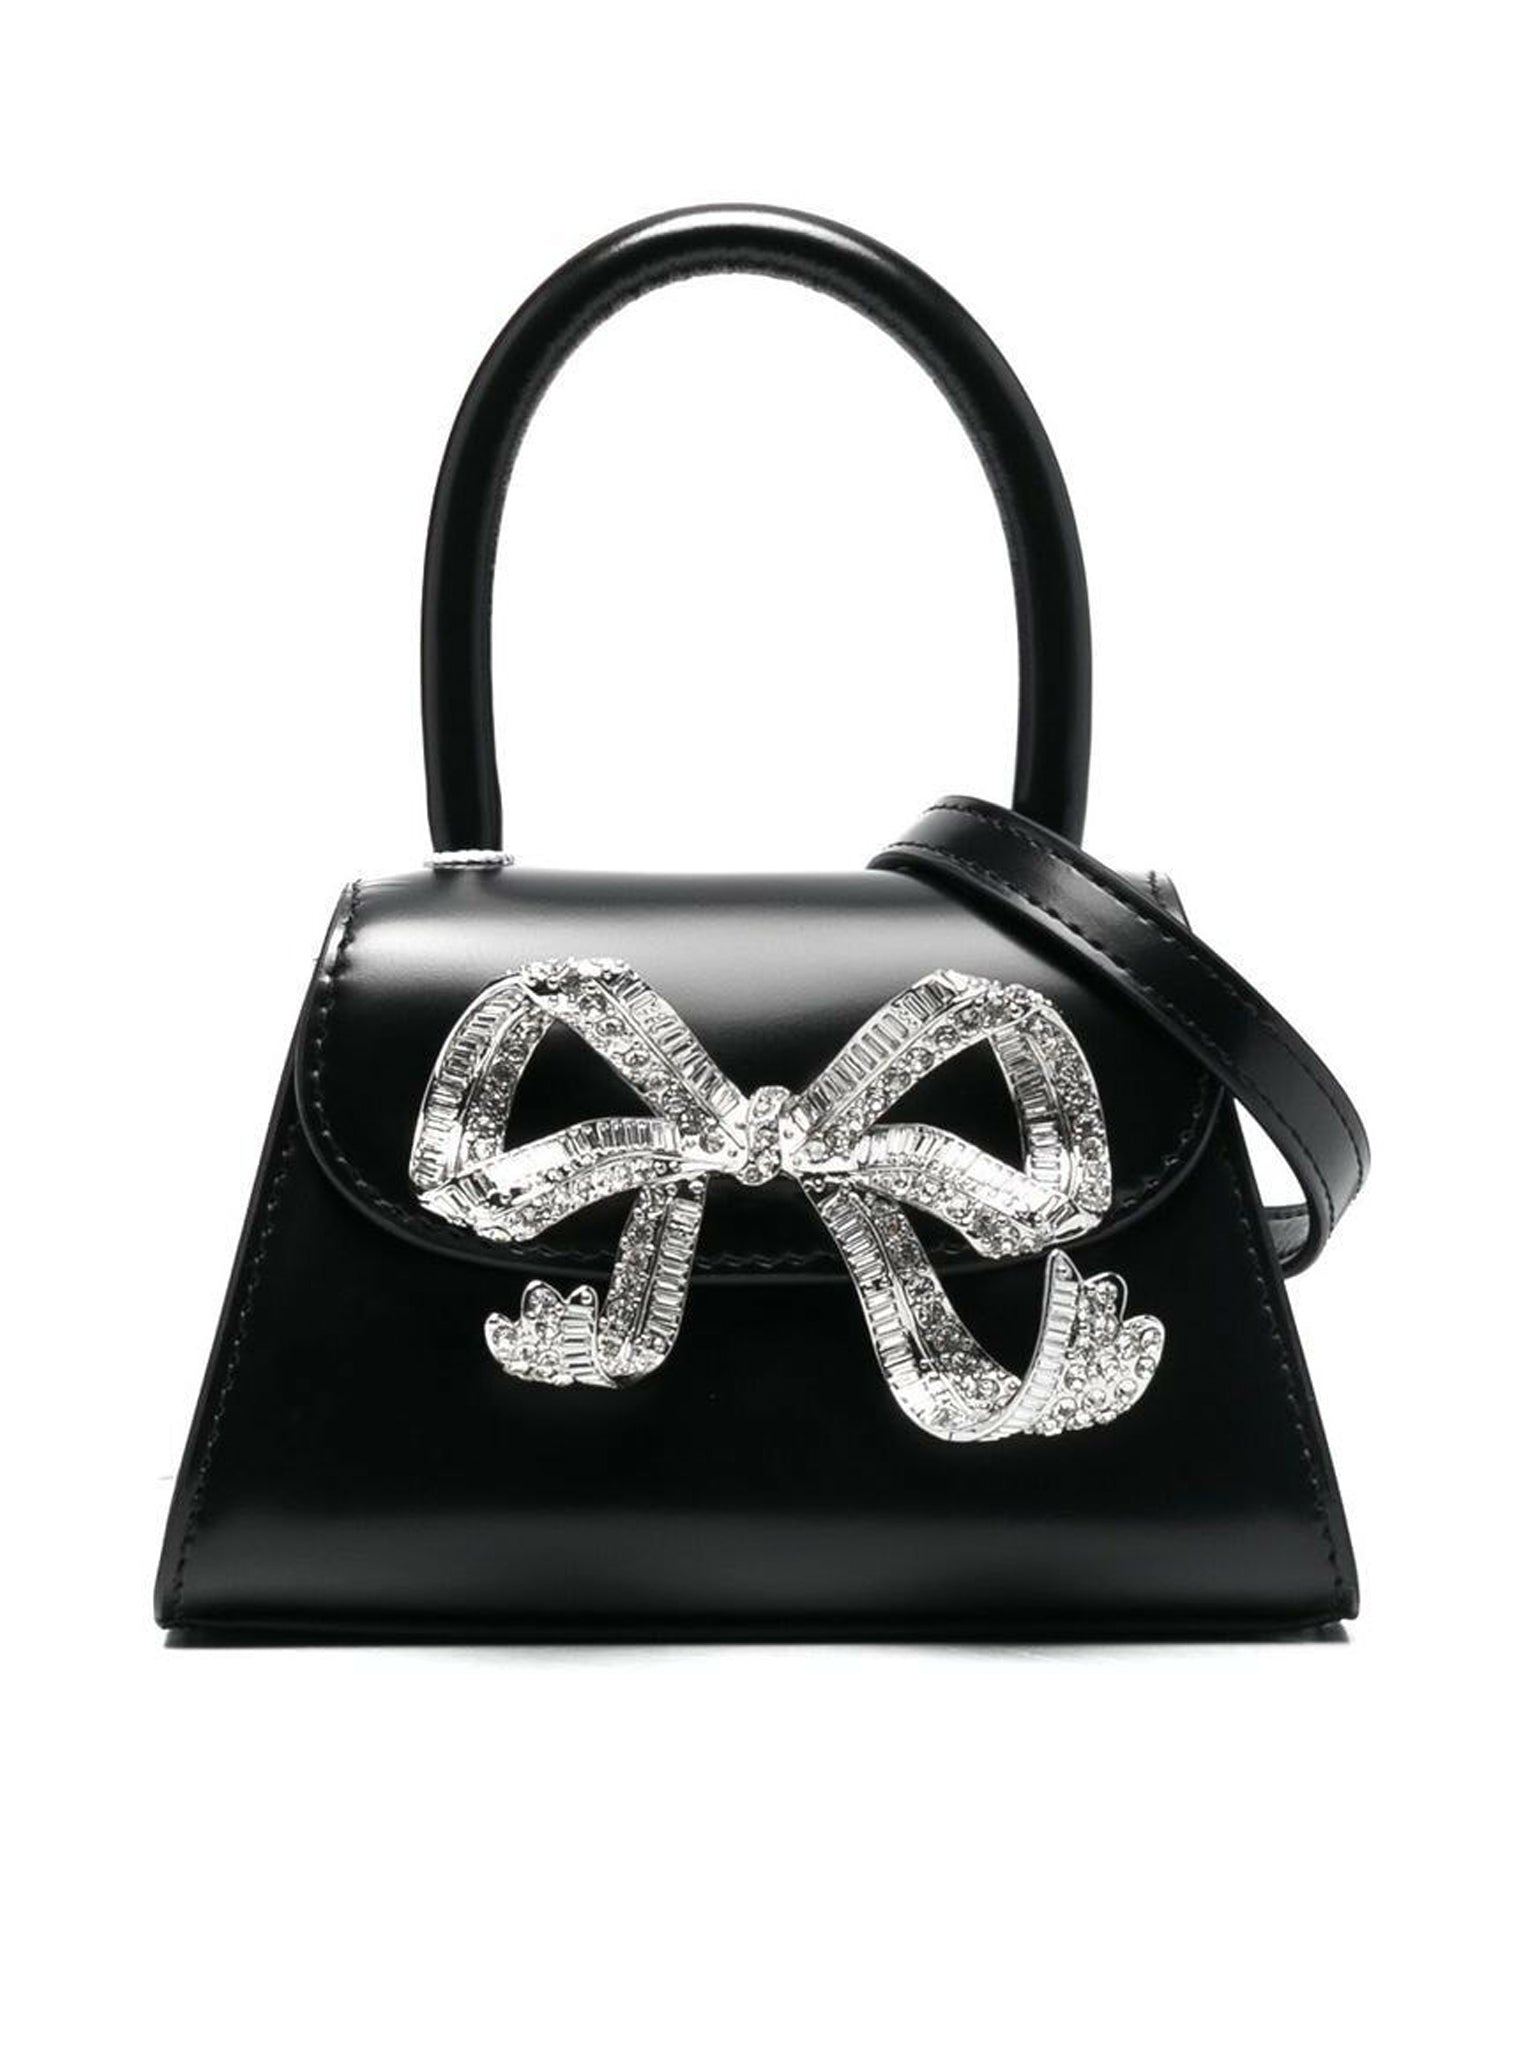 The Bow embellished tote bag